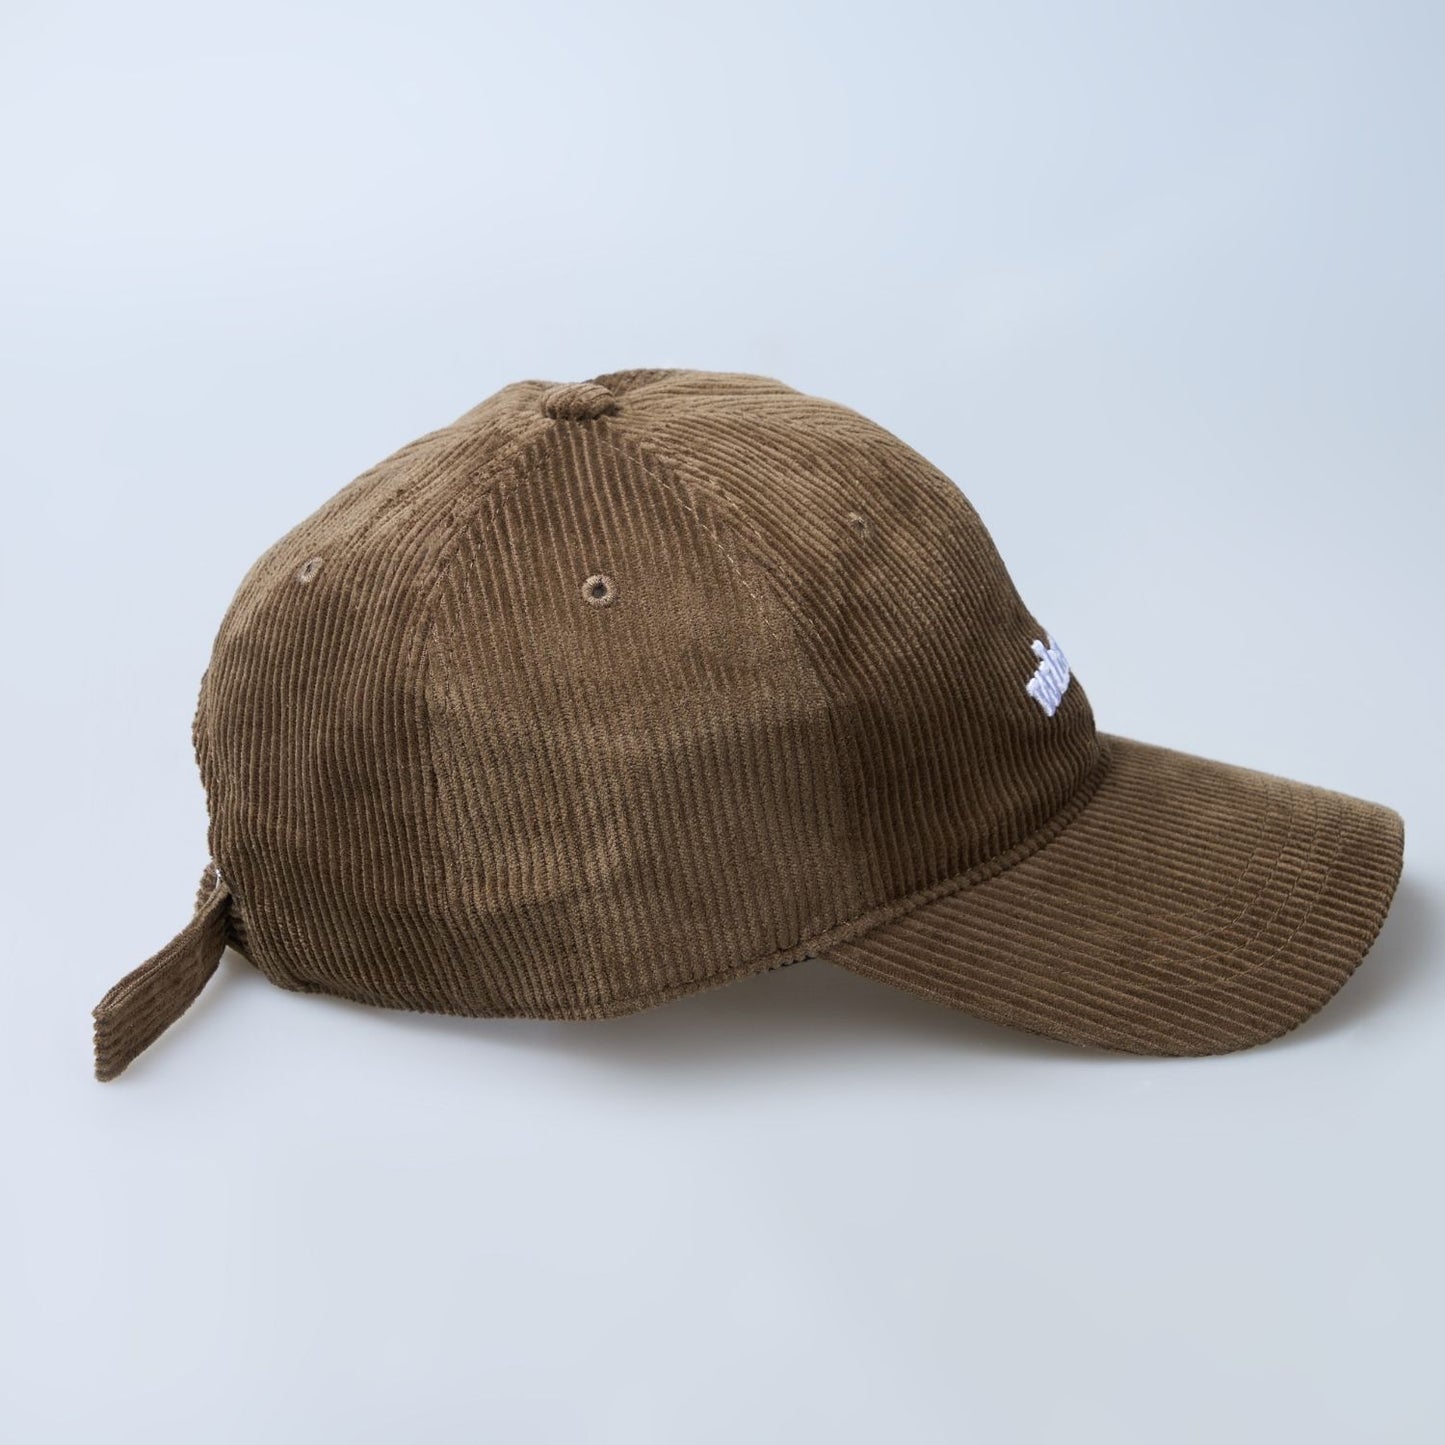 Brown colored cap for men with 'what' text written on it, side view.